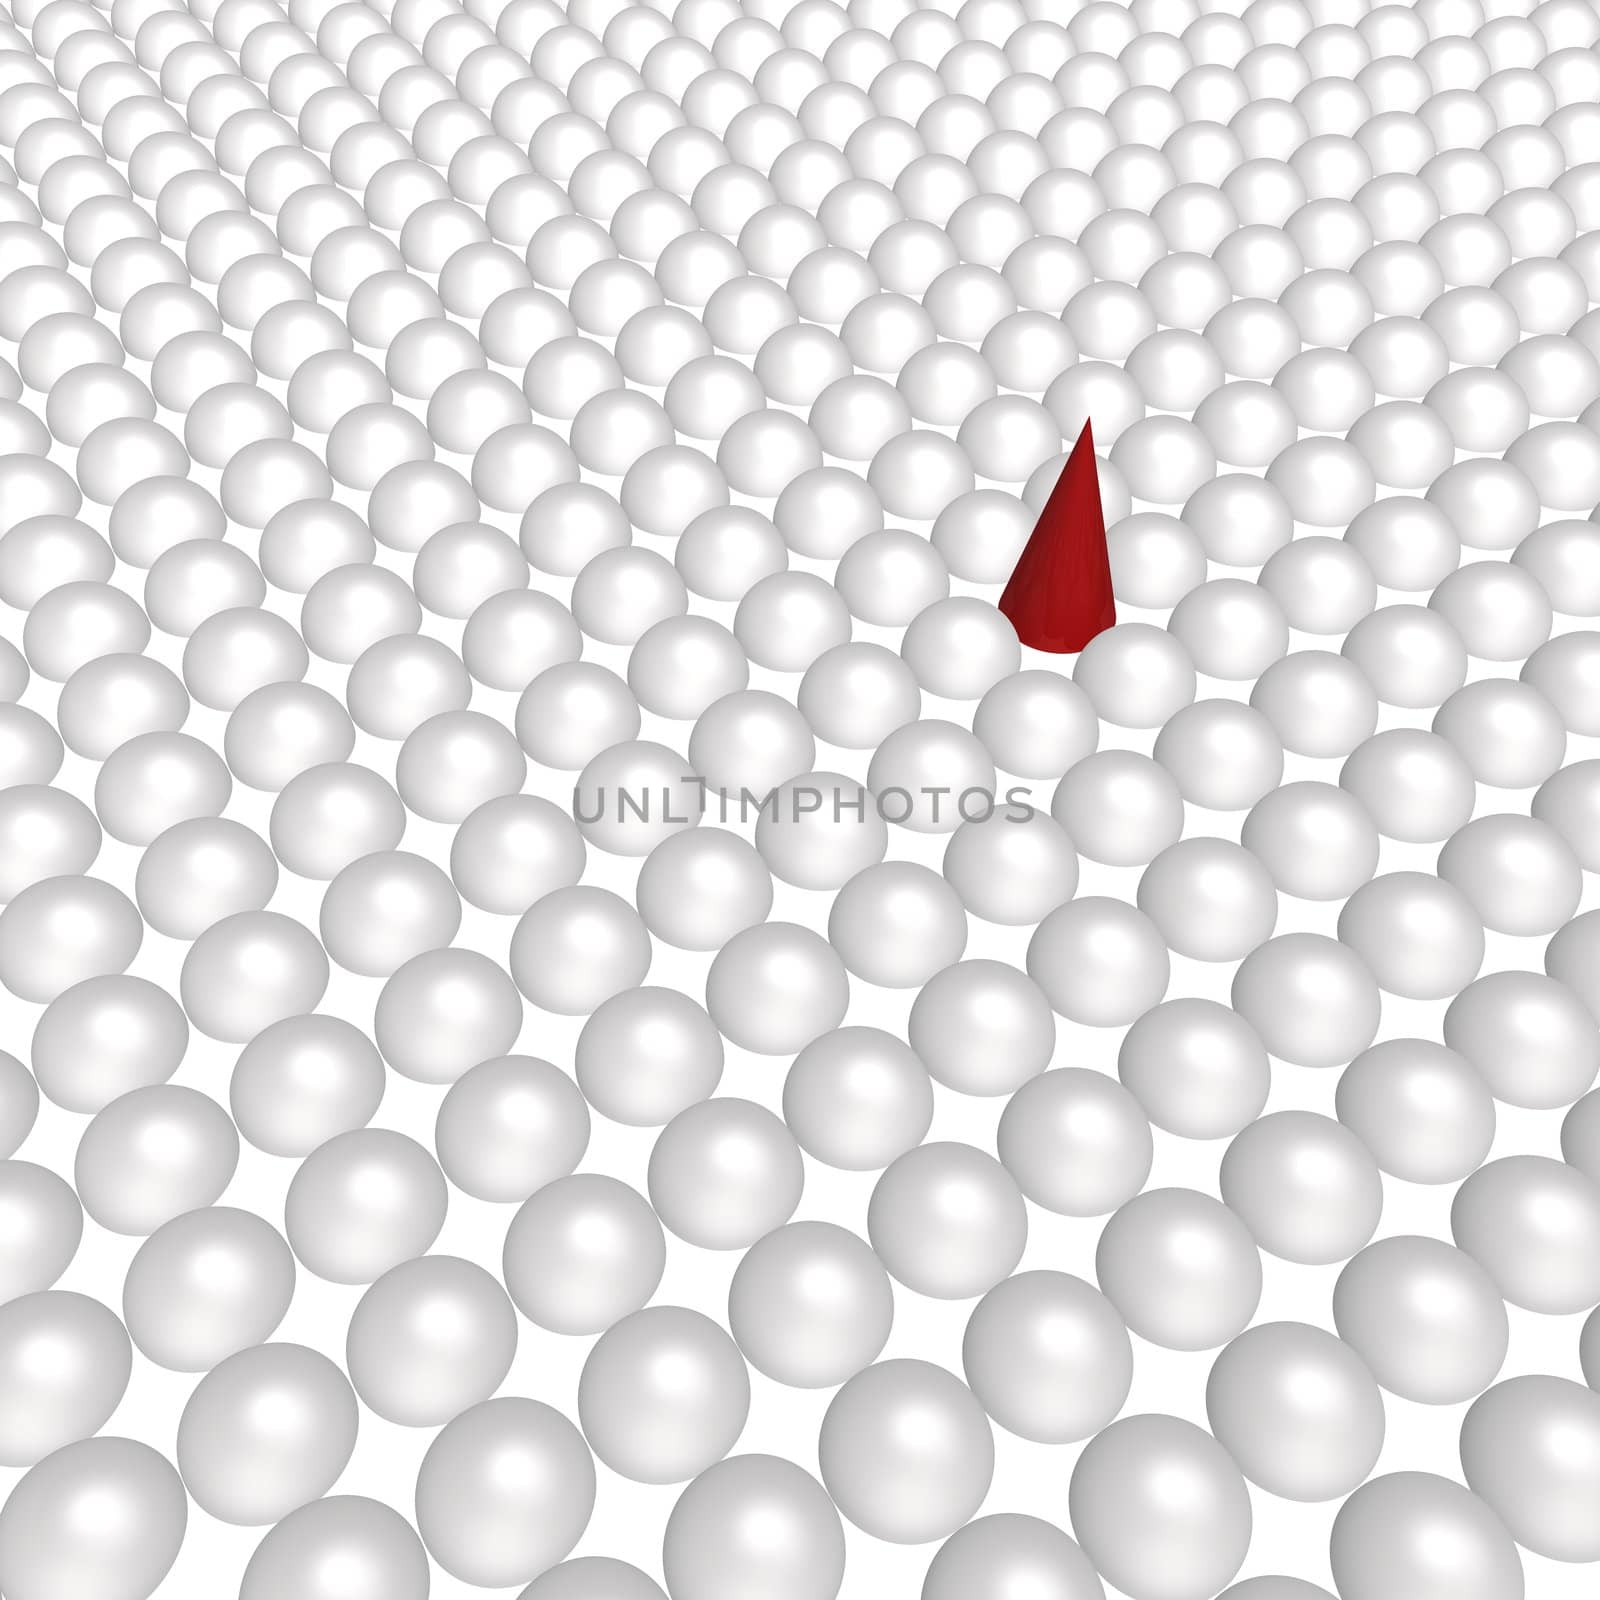 surface from white balls and a red cone - 3d illustration